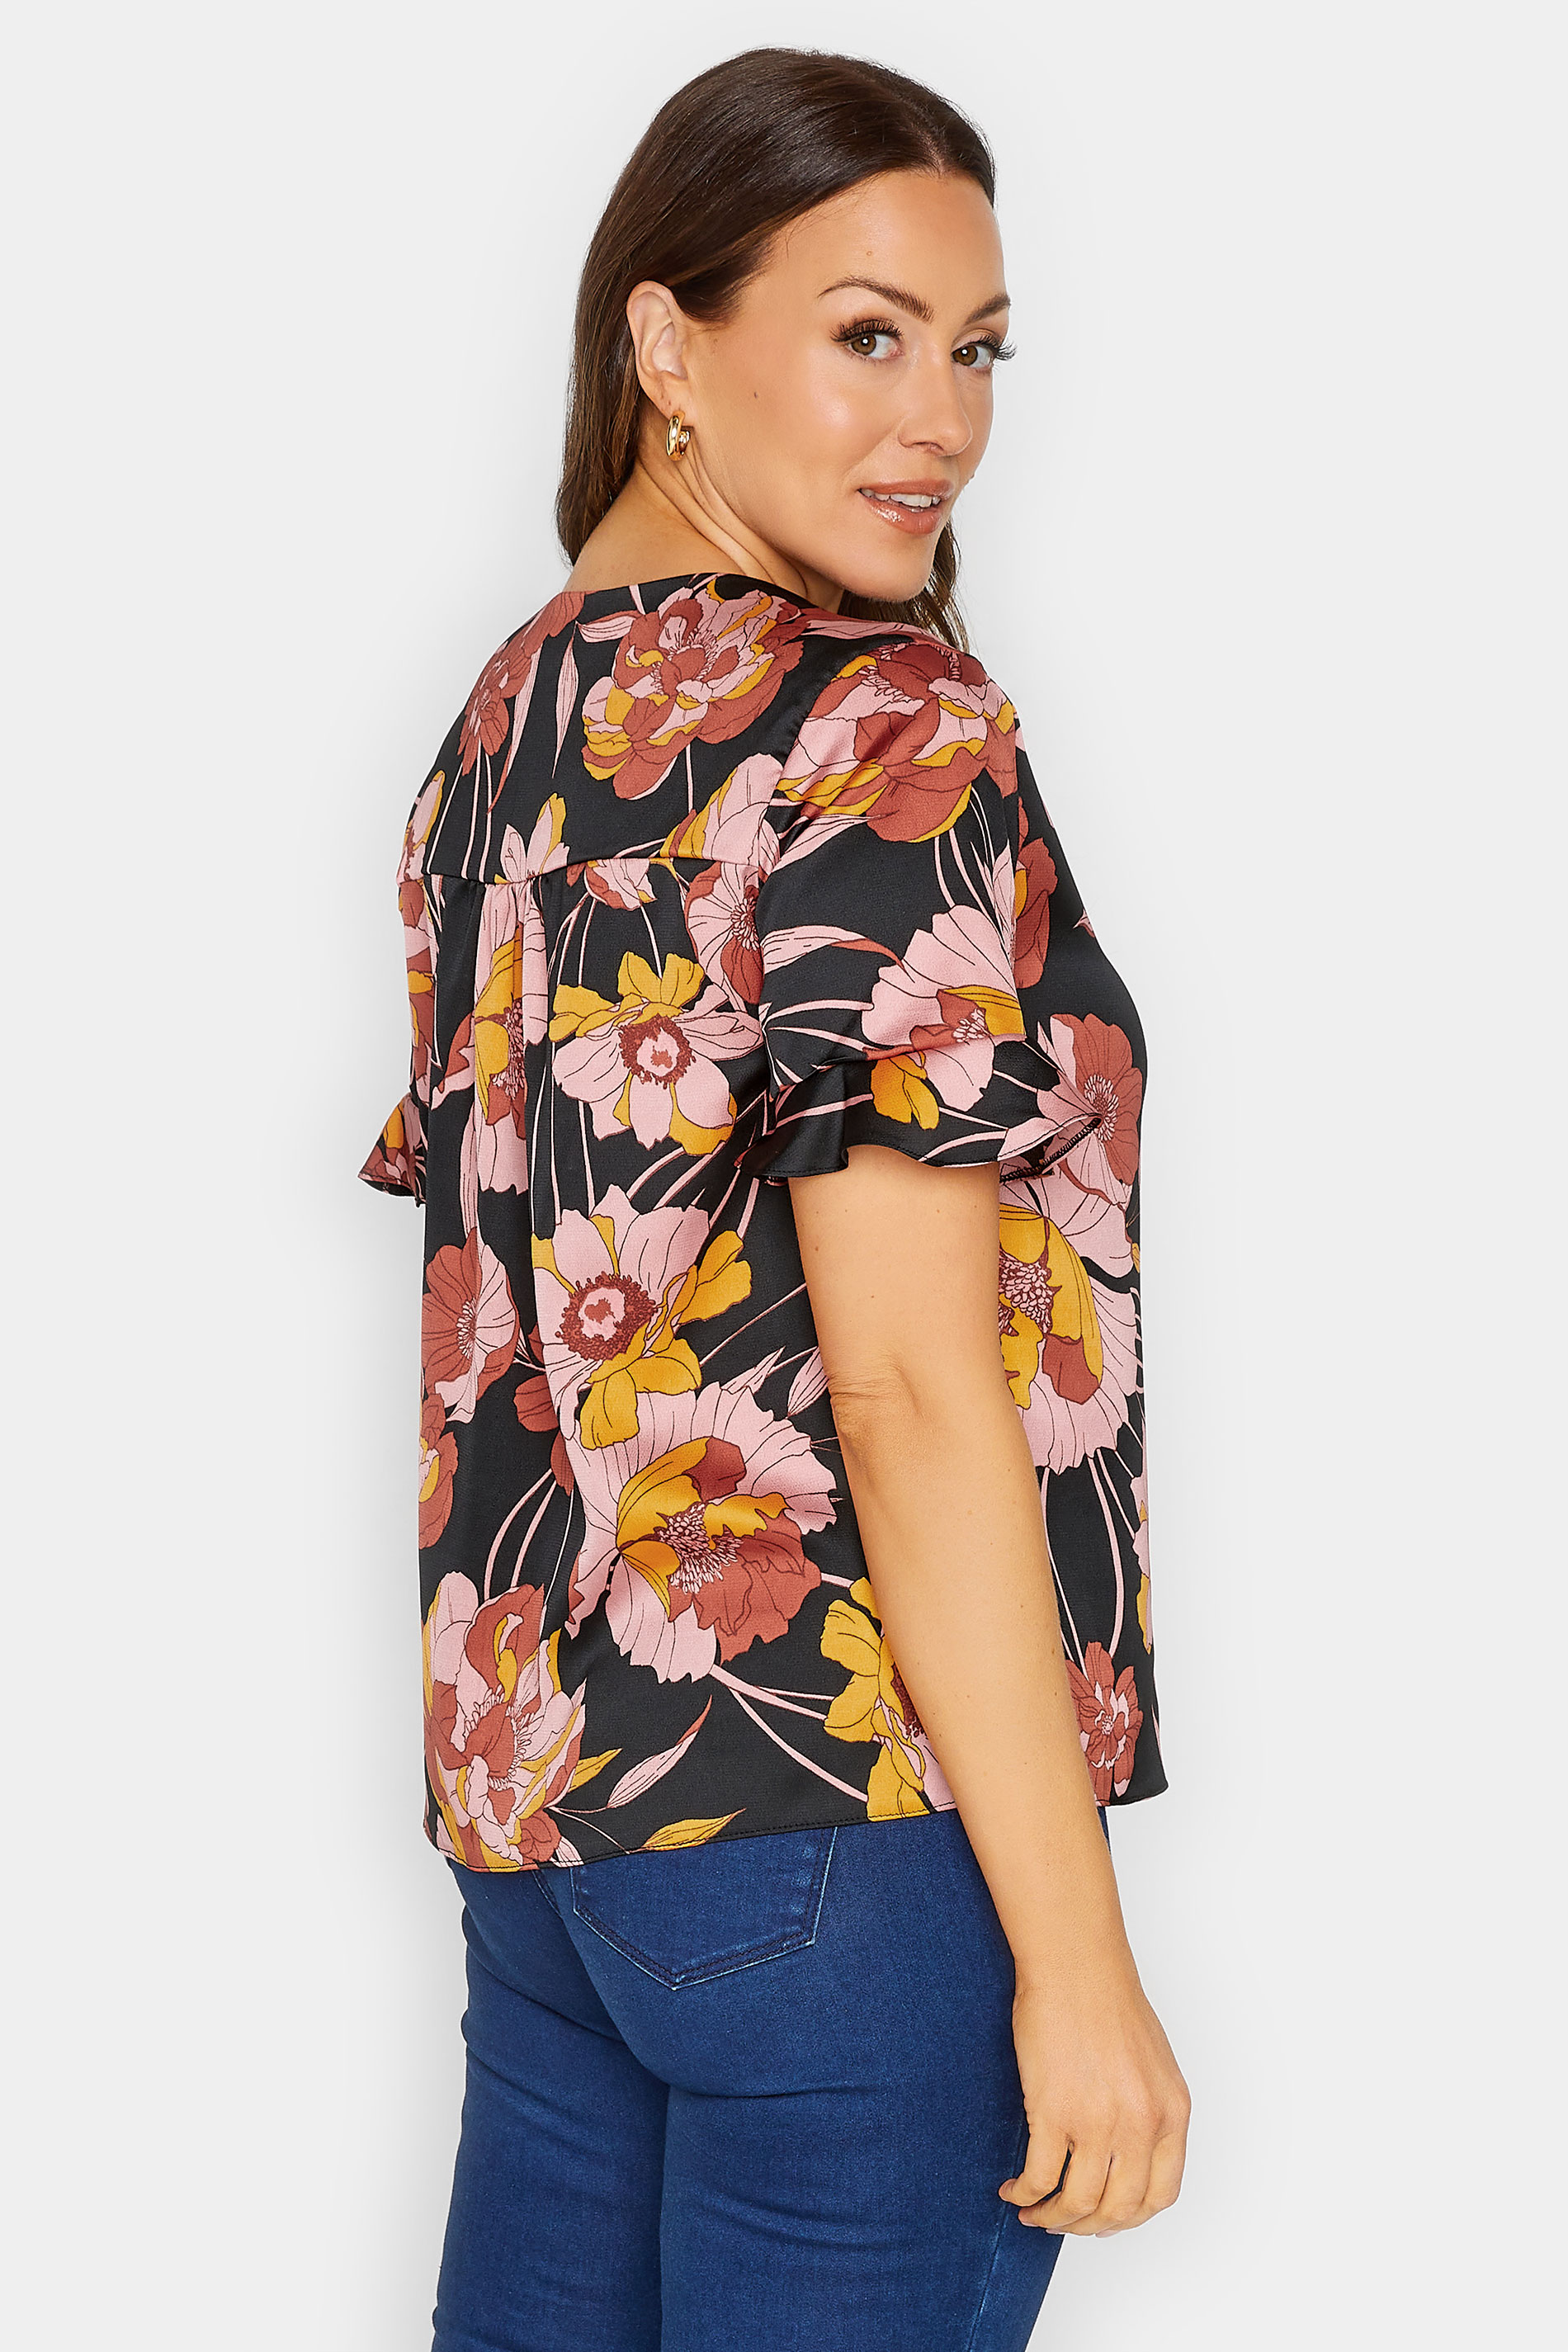 M&Co Black Floral Print Frill Sleeve Blouse | M&Co 3